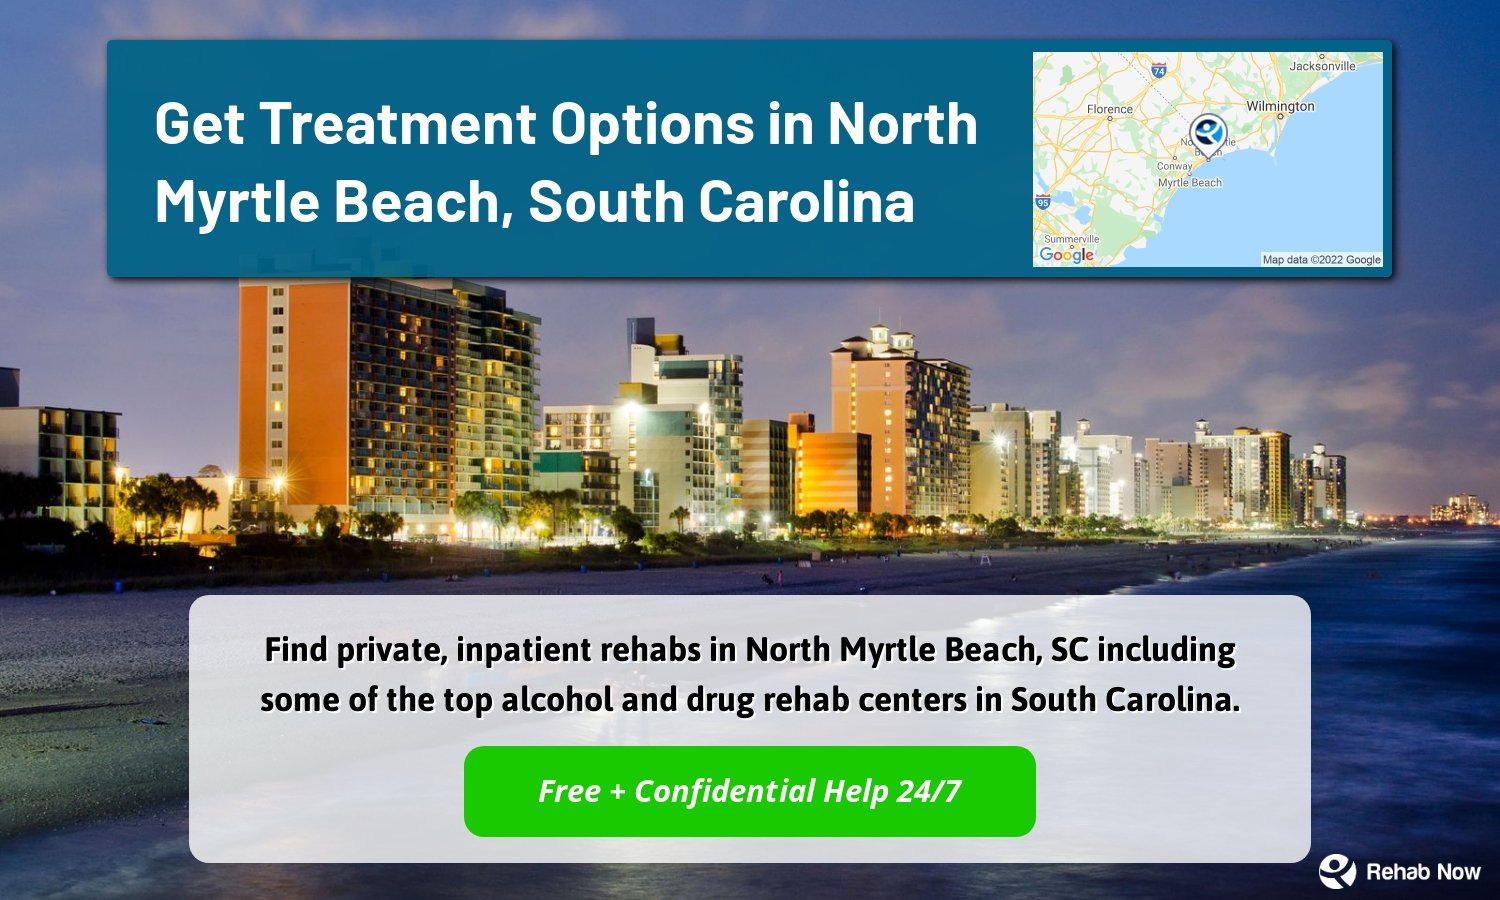 Find private, inpatient rehabs in North Myrtle Beach, SC including some of the top alcohol and drug rehab centers in South Carolina.